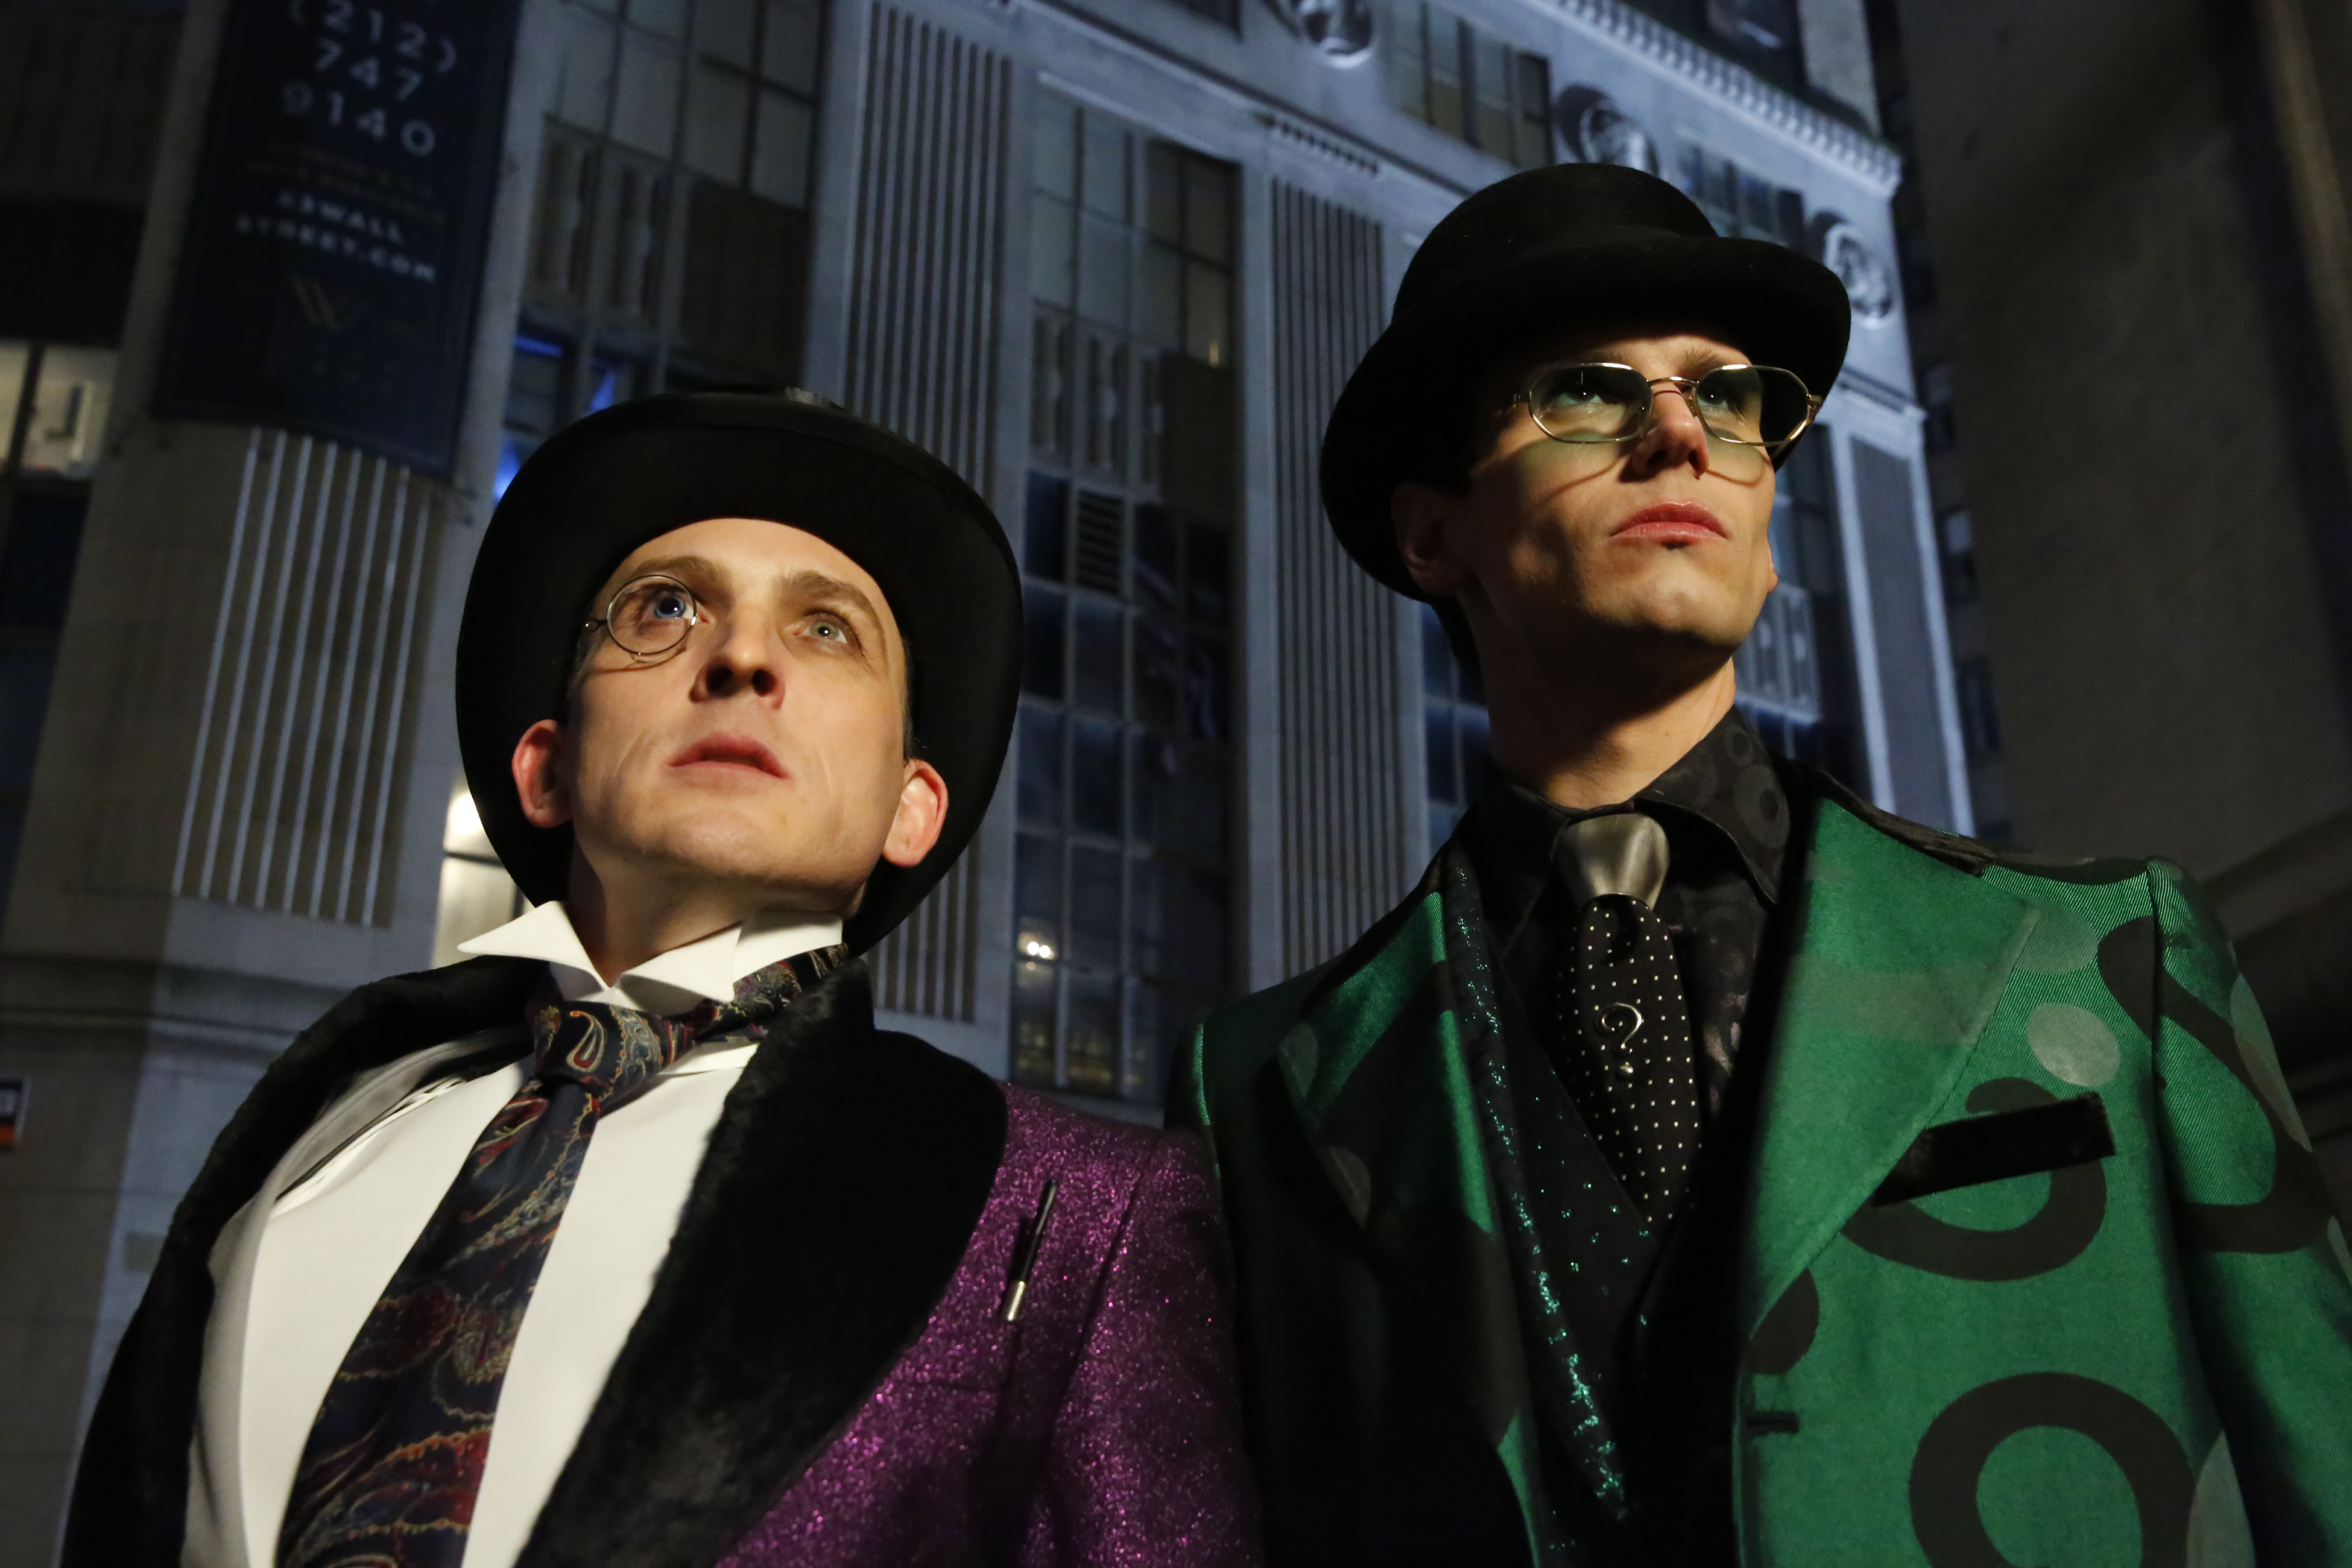 A mixed-feelings farewell to “Gotham”